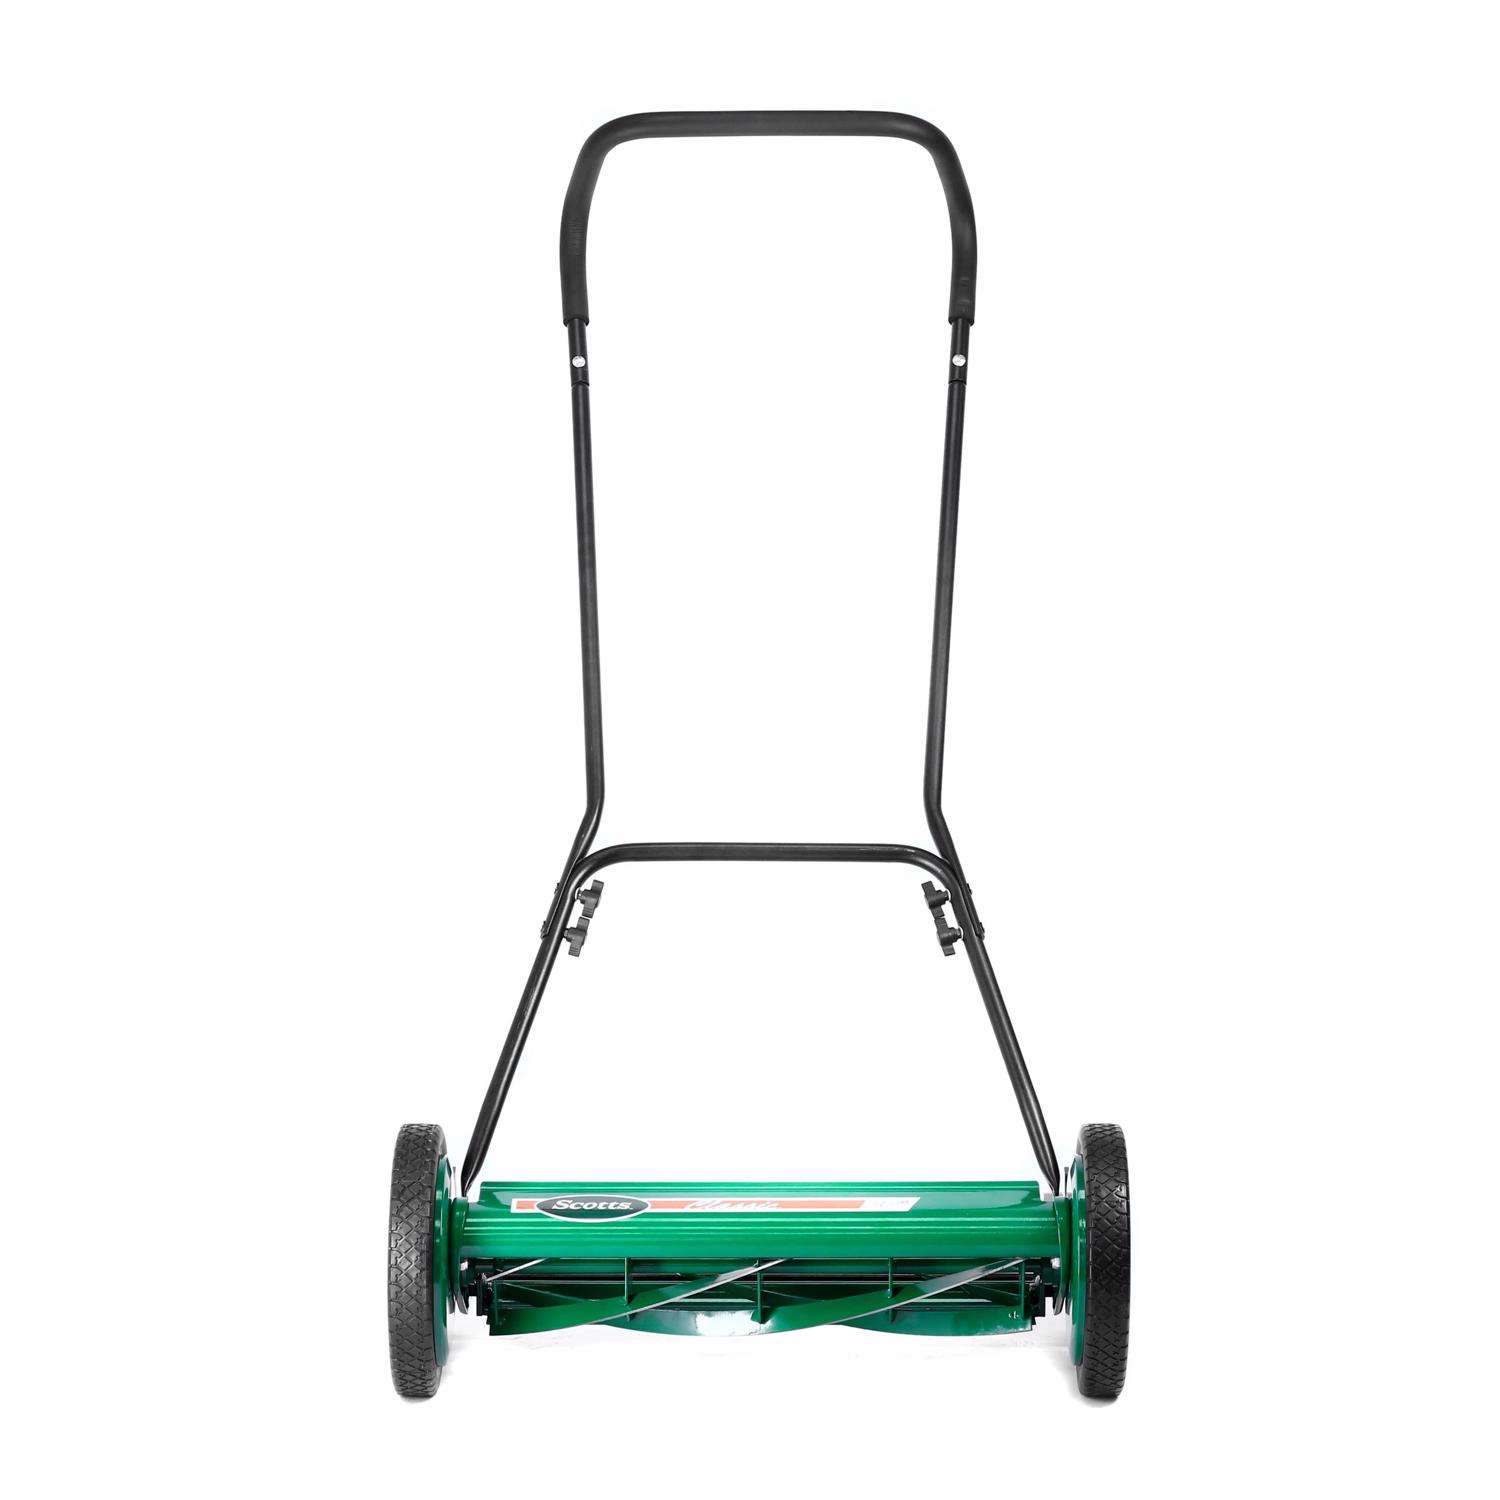 Scotts Classic 20 in. Manual Lawn Mower - Ace Hardware